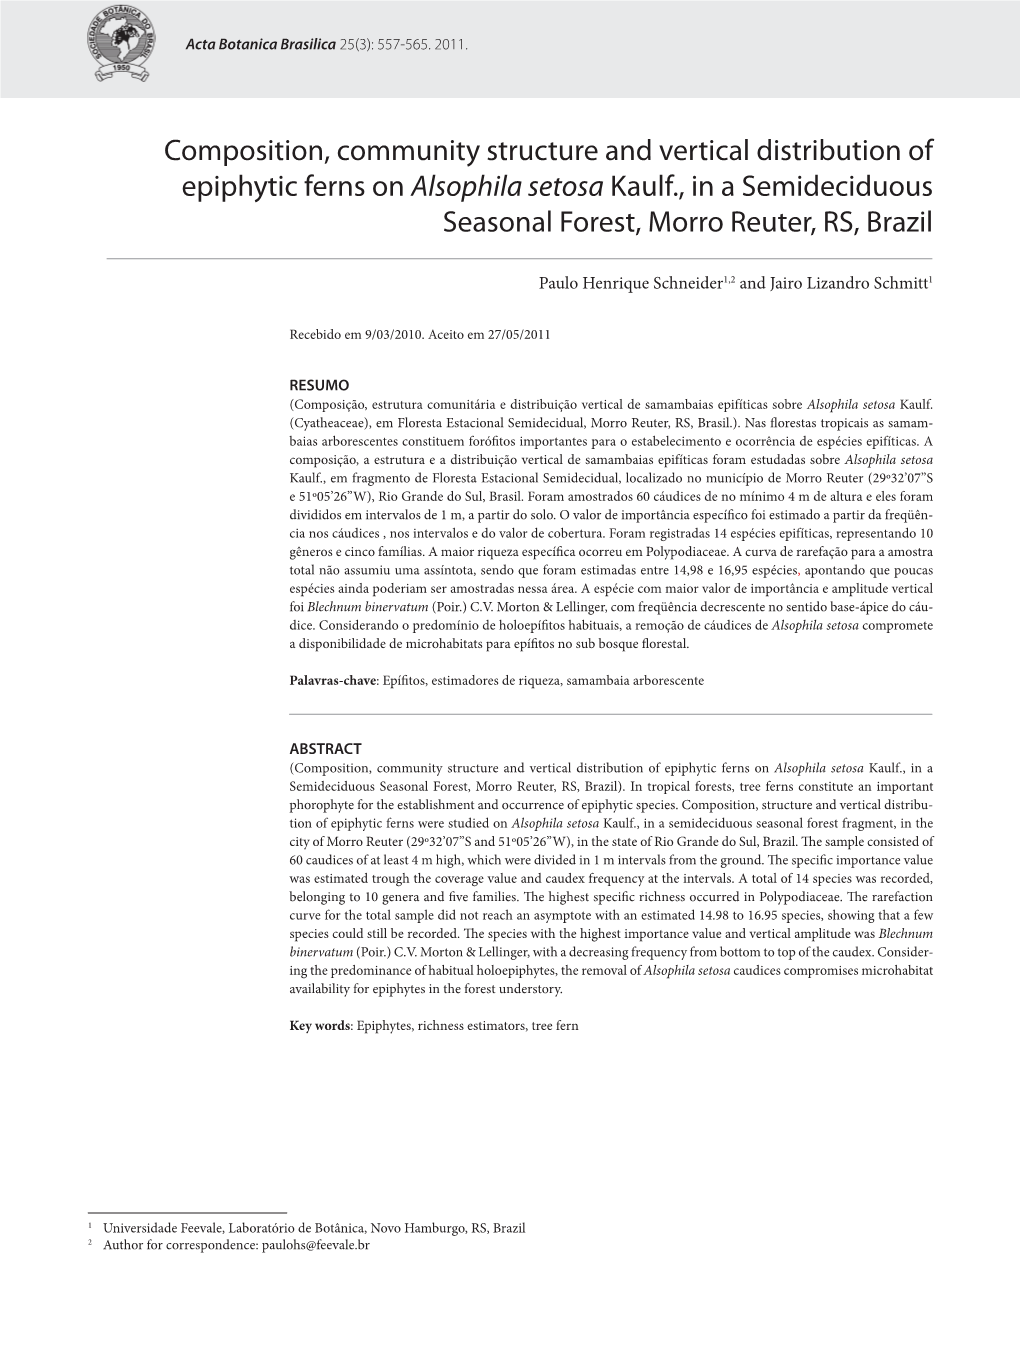 Composition, Community Structure and Vertical Distribution of Epiphytic Ferns on Alsophila Setosa Kaulf., in a Semideciduous Seasonal Forest, Morro Reuter, RS, Brazil